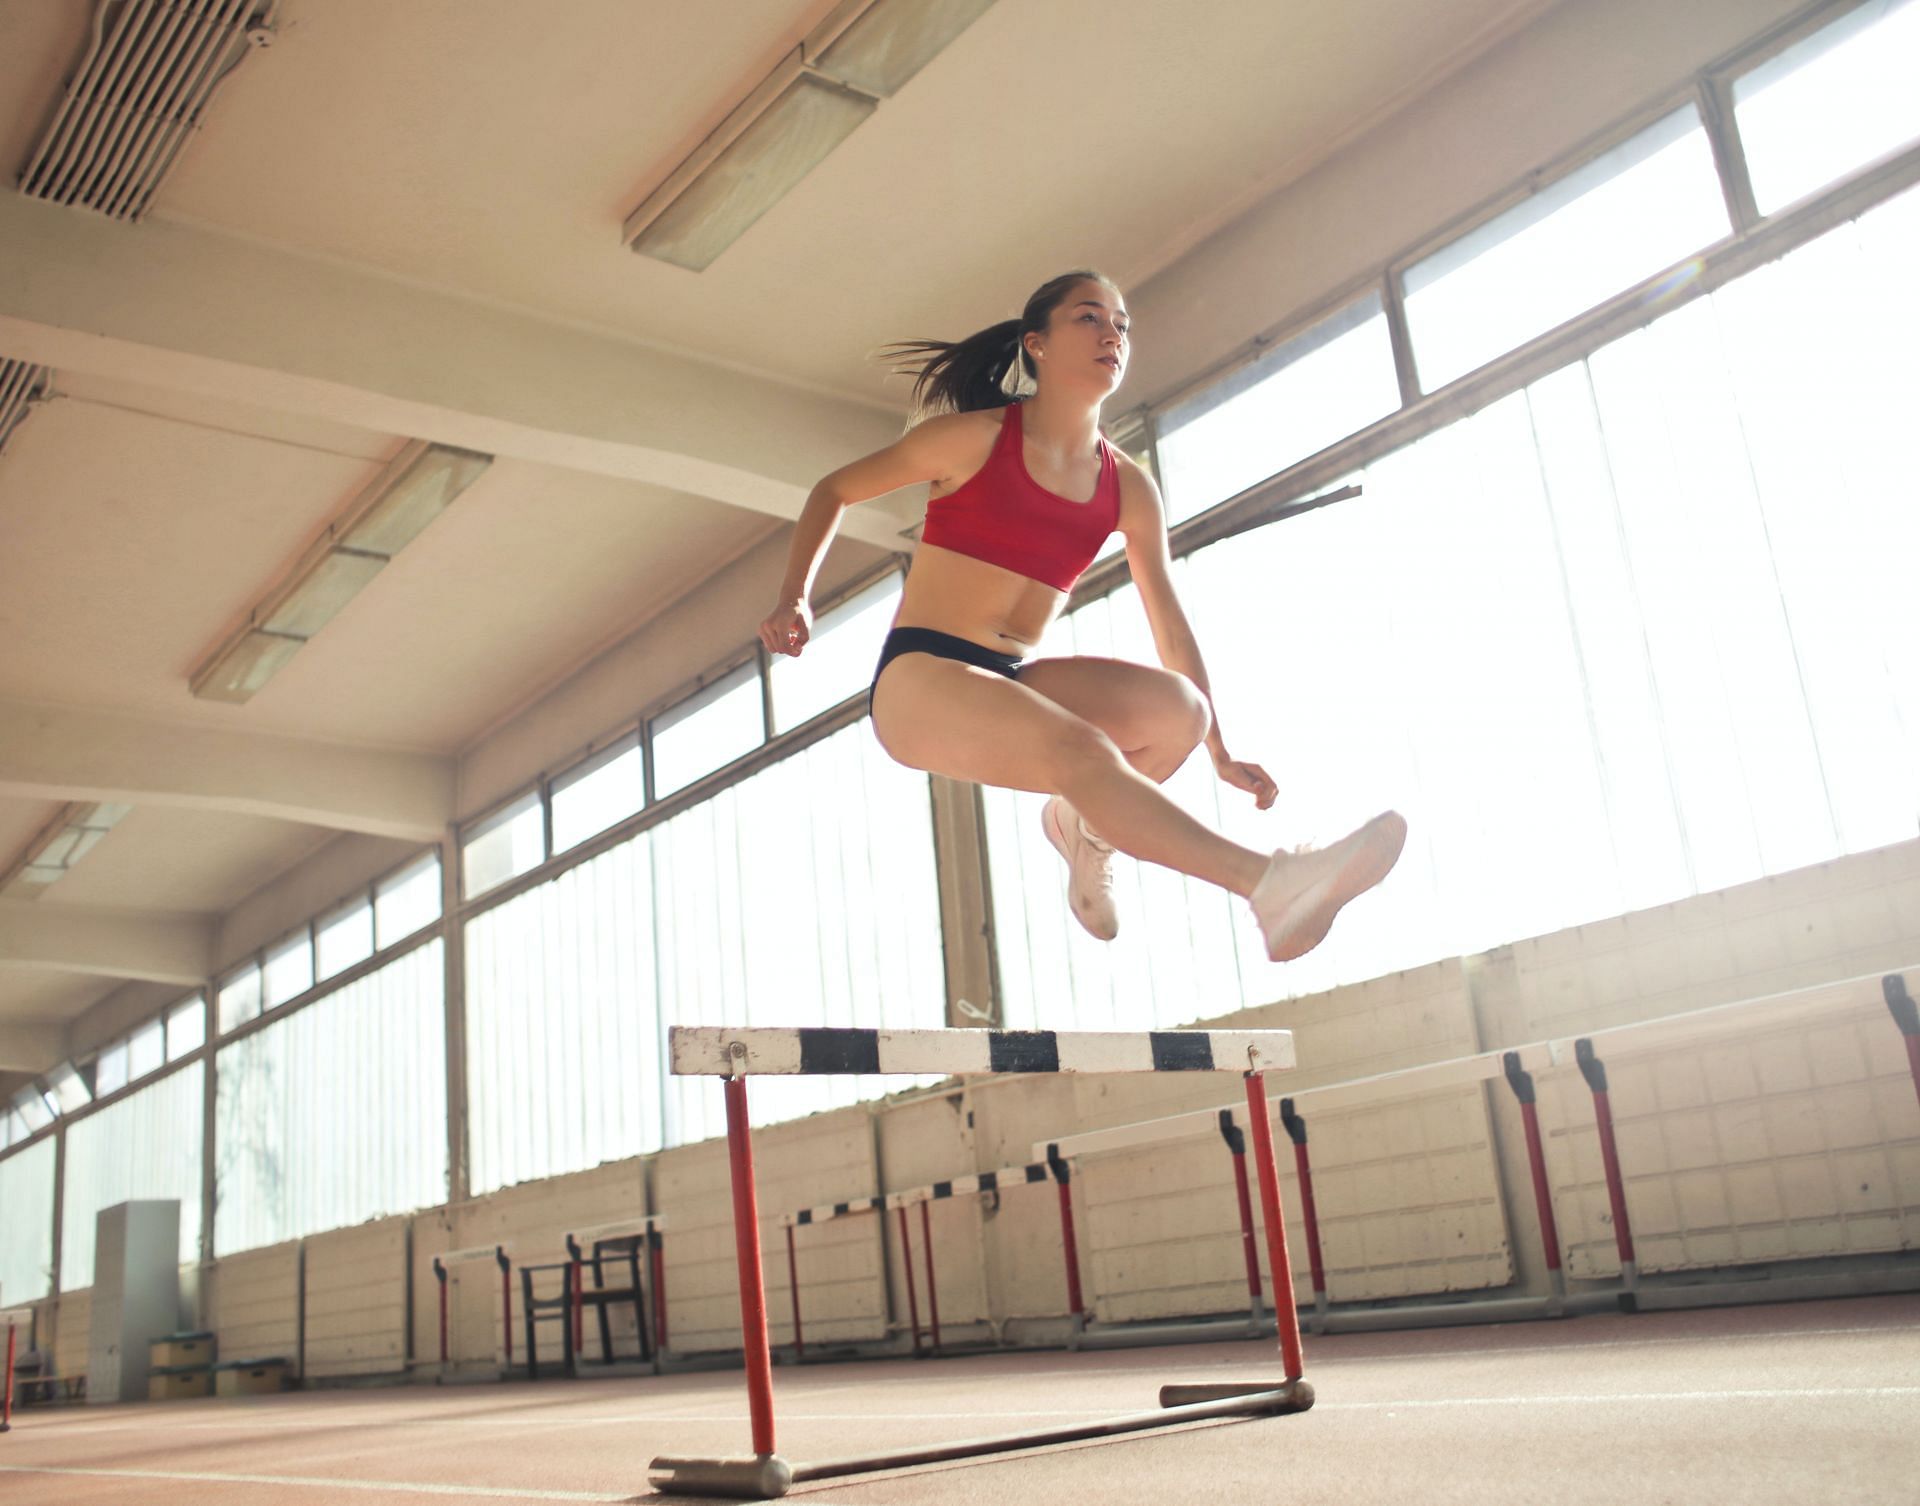 Speed, movement efficiency, and power can all be improved by training like an athlete (Image via Pexels/Andrea Piacuquadio)